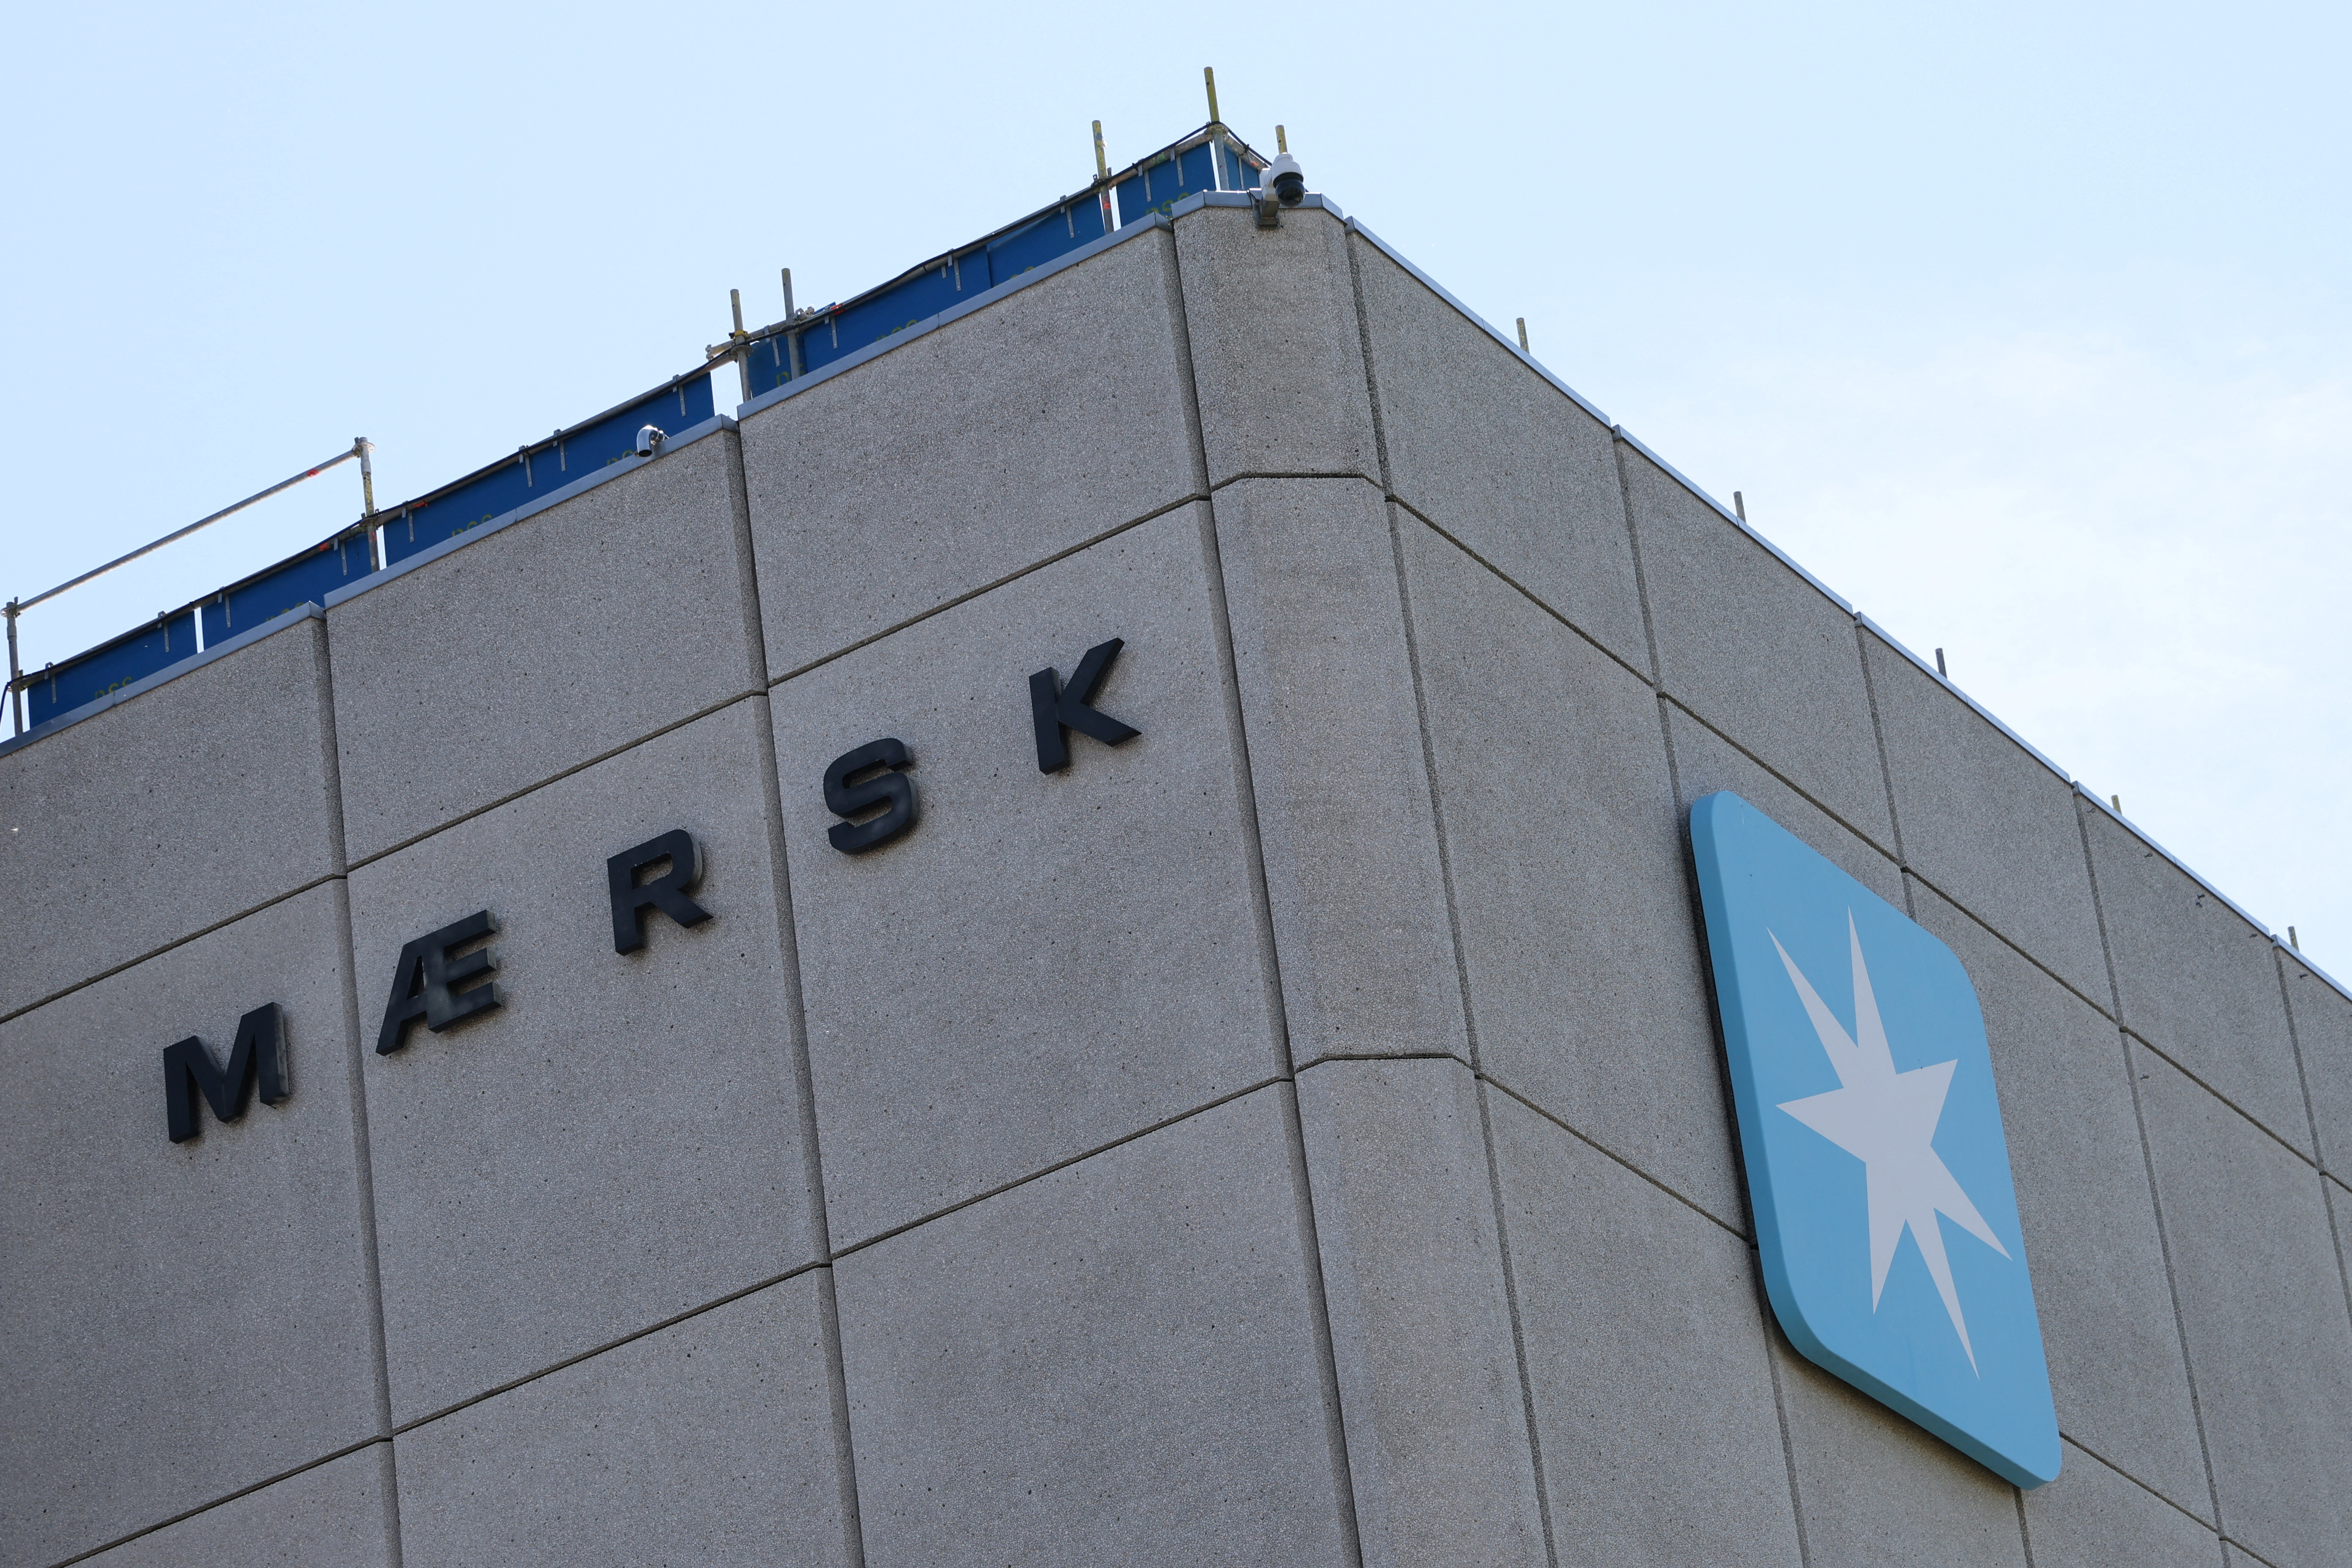 Signage is seen at the Maersk offices in Copenhagen